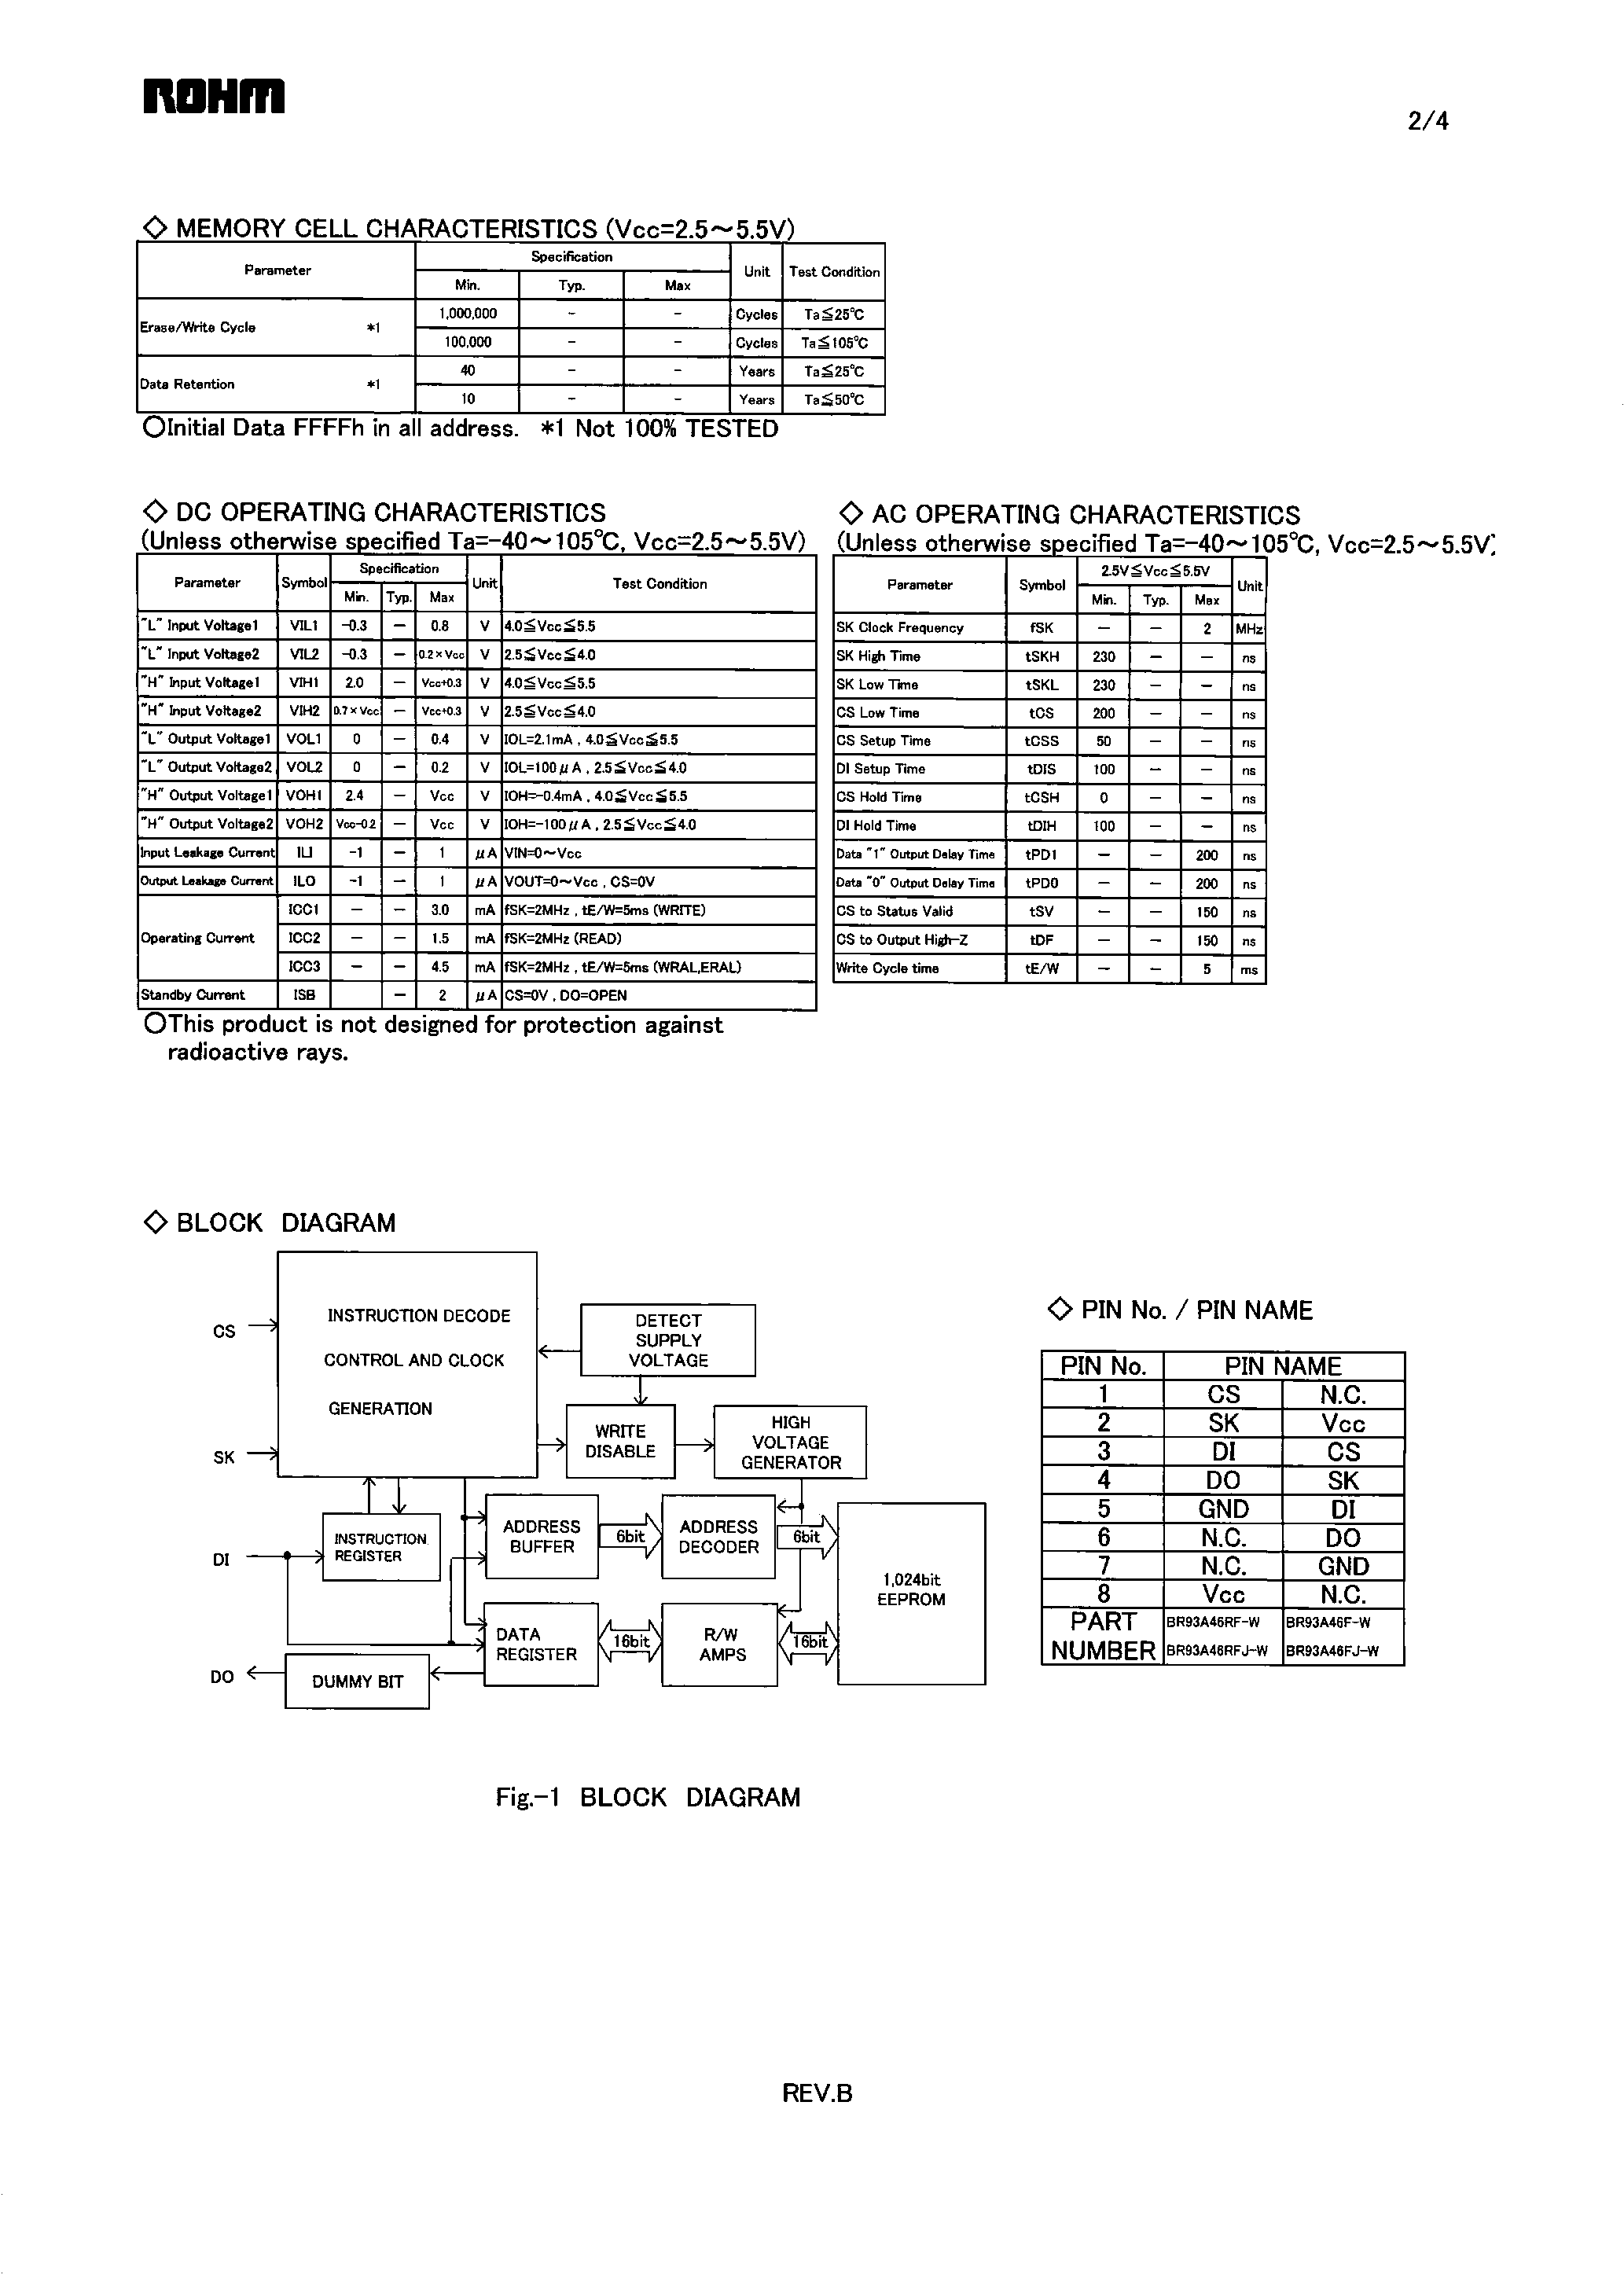 Datasheet BR93A46-W - Microwire BUS EEPROM page 2